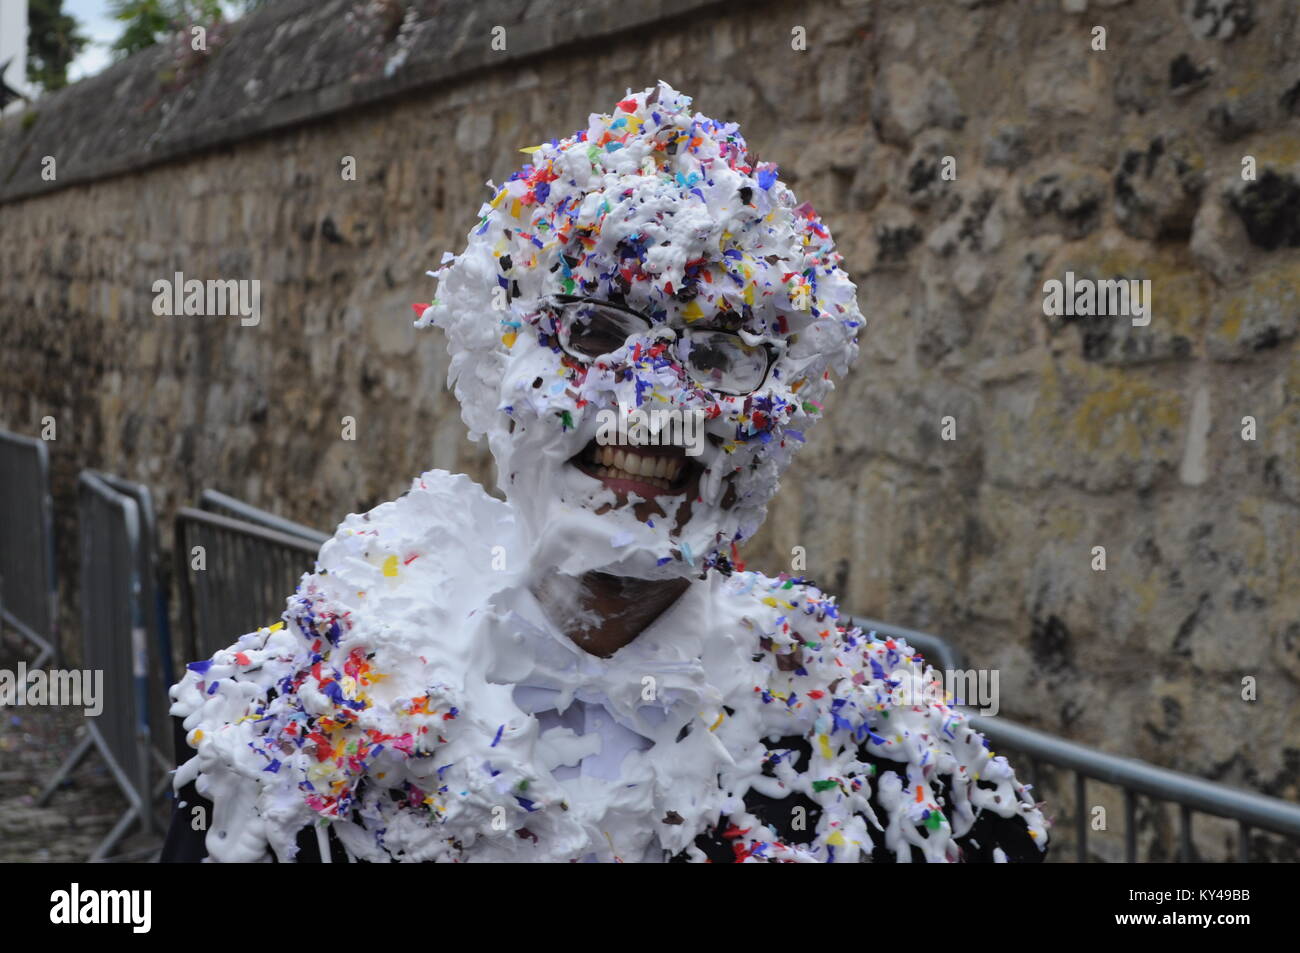 Students leaving their last exam meet friends for a traditional 'trashing' at the back of Oxford University Examination School, Oxford, England, UK. Stock Photo